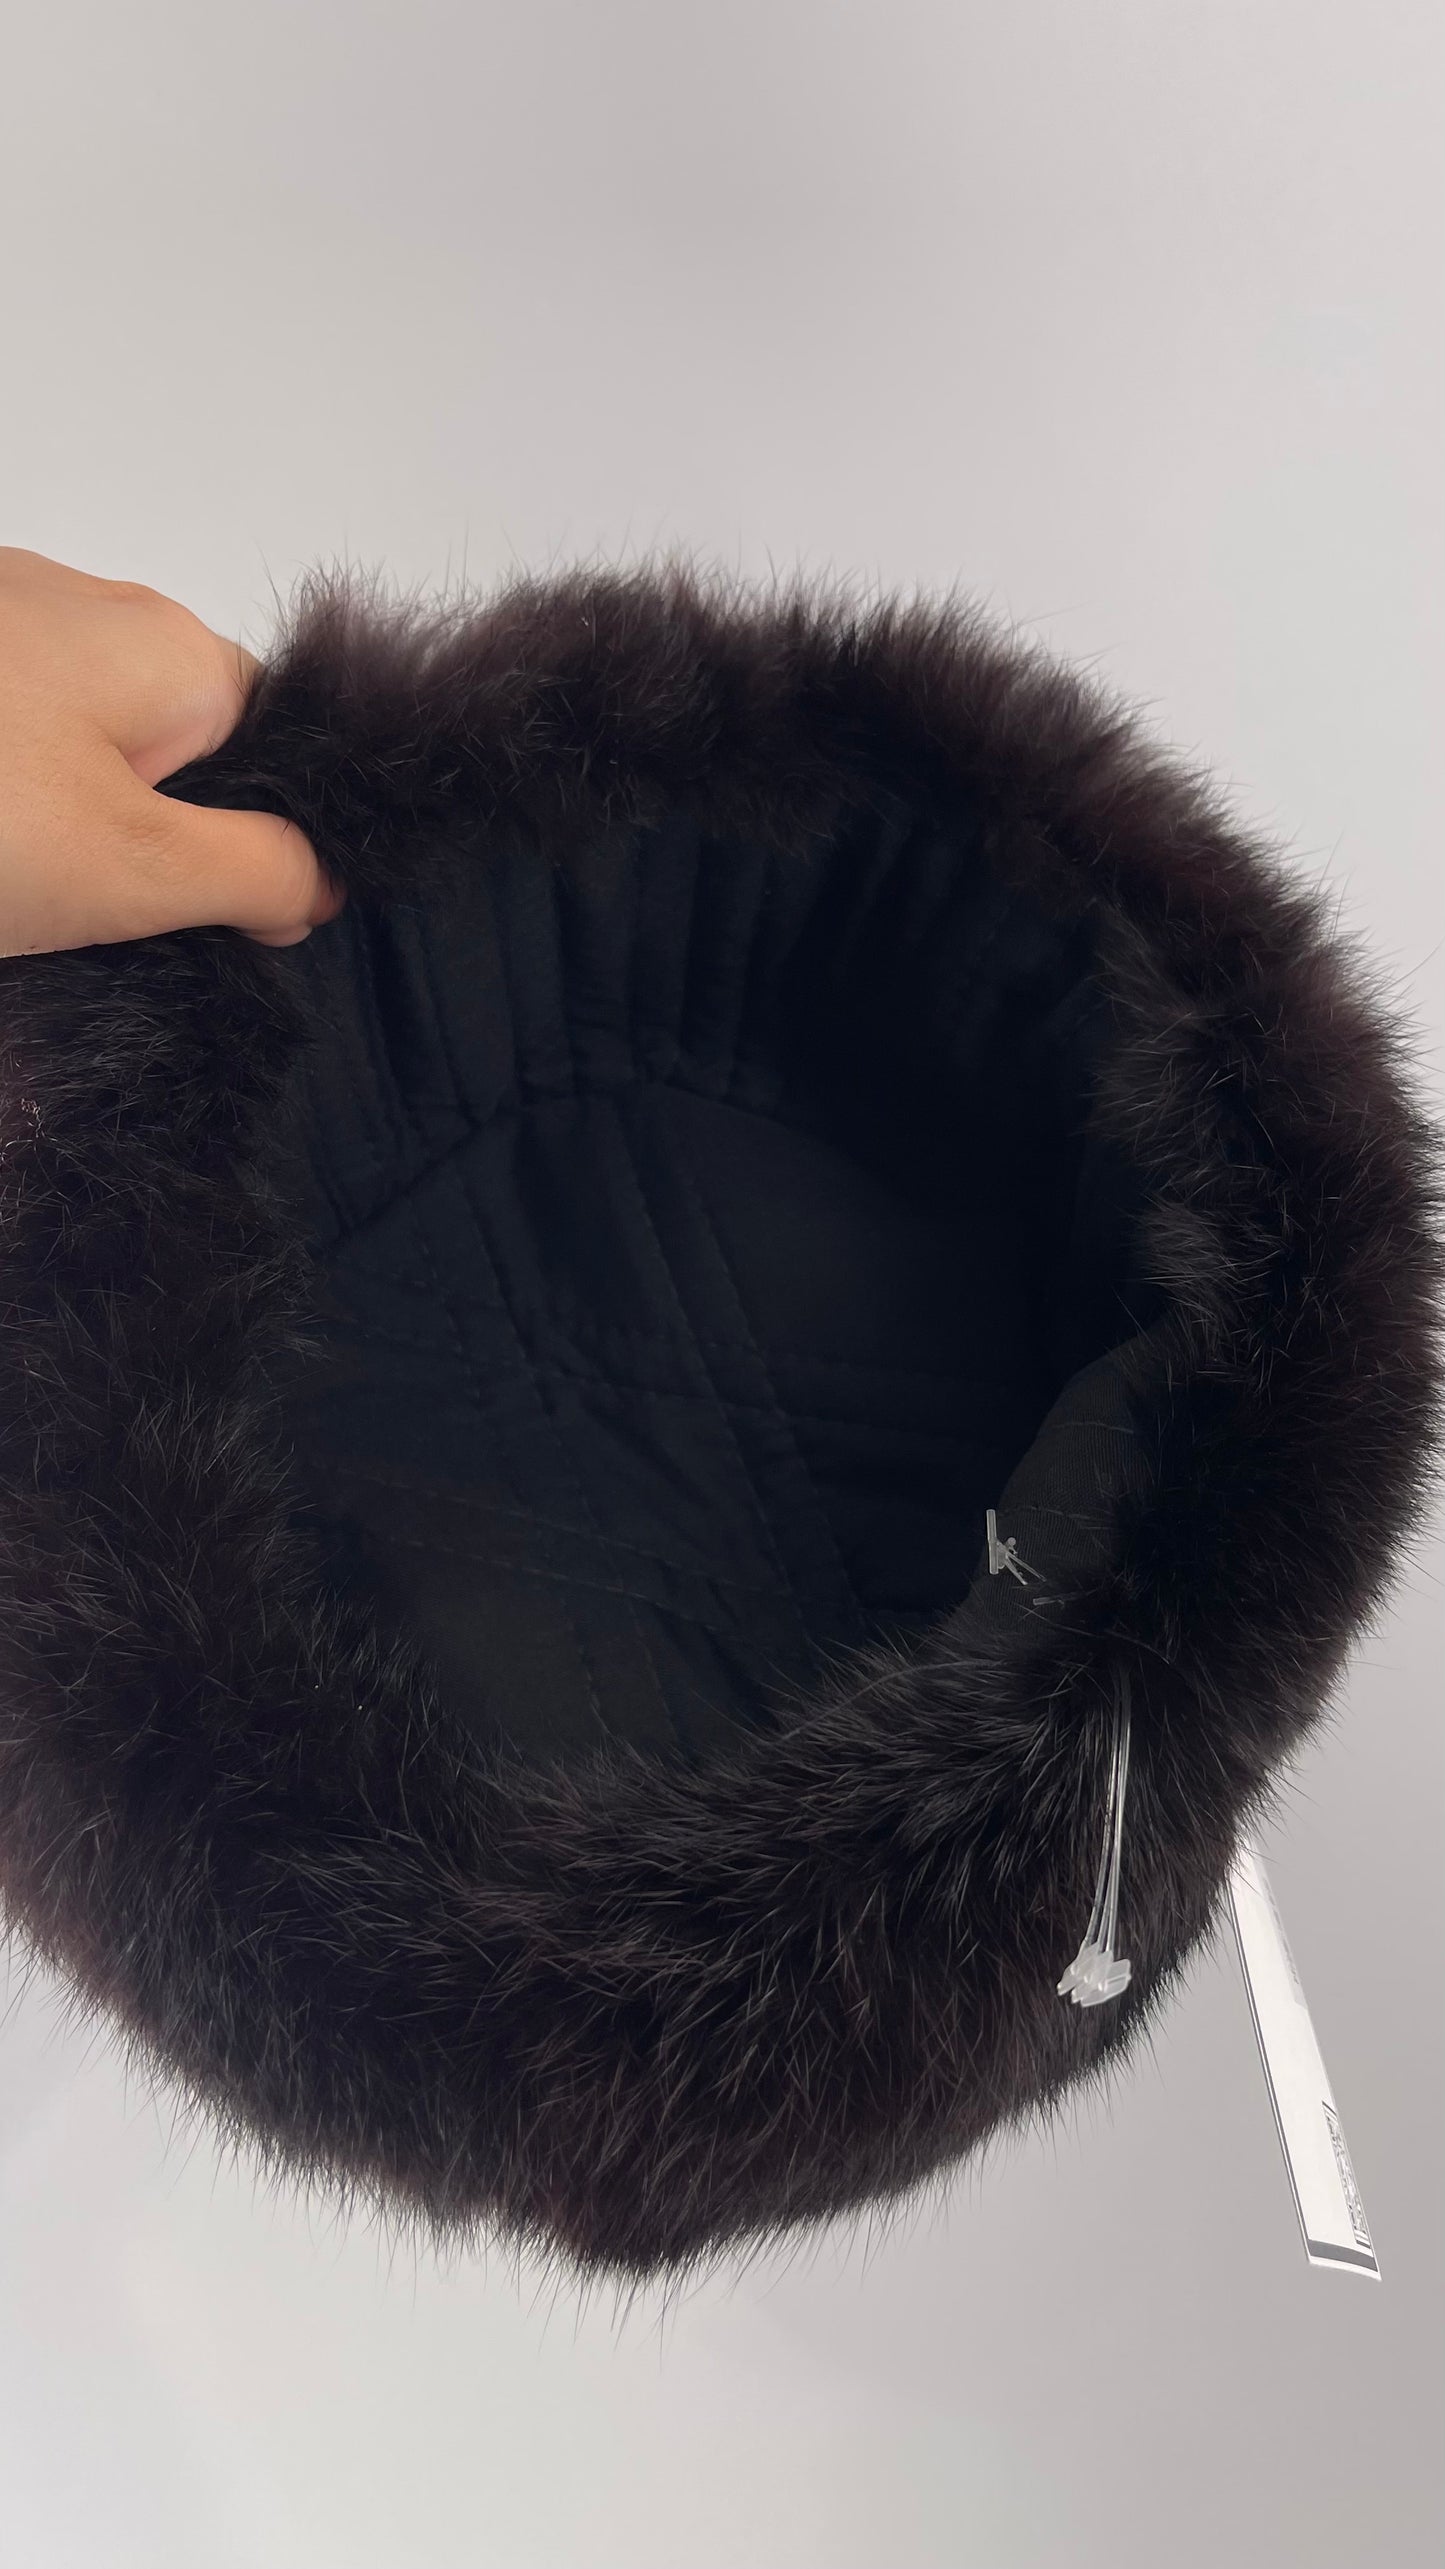 Vintage Russian Black Genuine Rabbit Fur Roller Hat with Pull Down Ear Muff Flaps